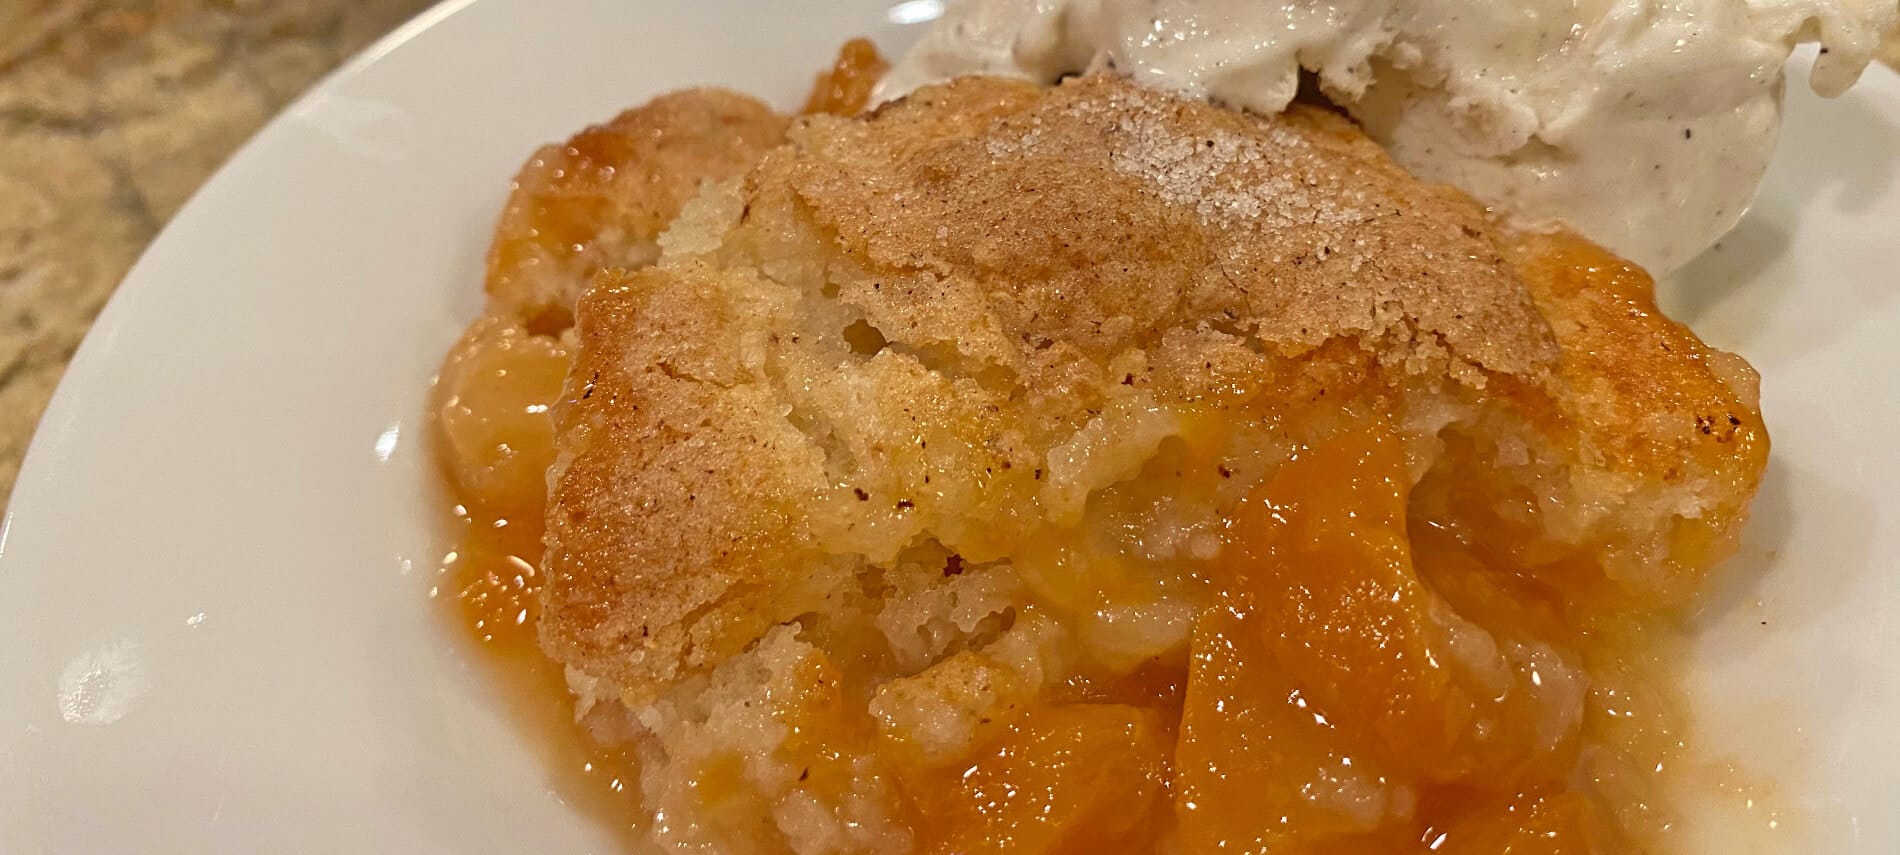 Juicy oranges peaches with a golden topping and white vanilla bean ice cream